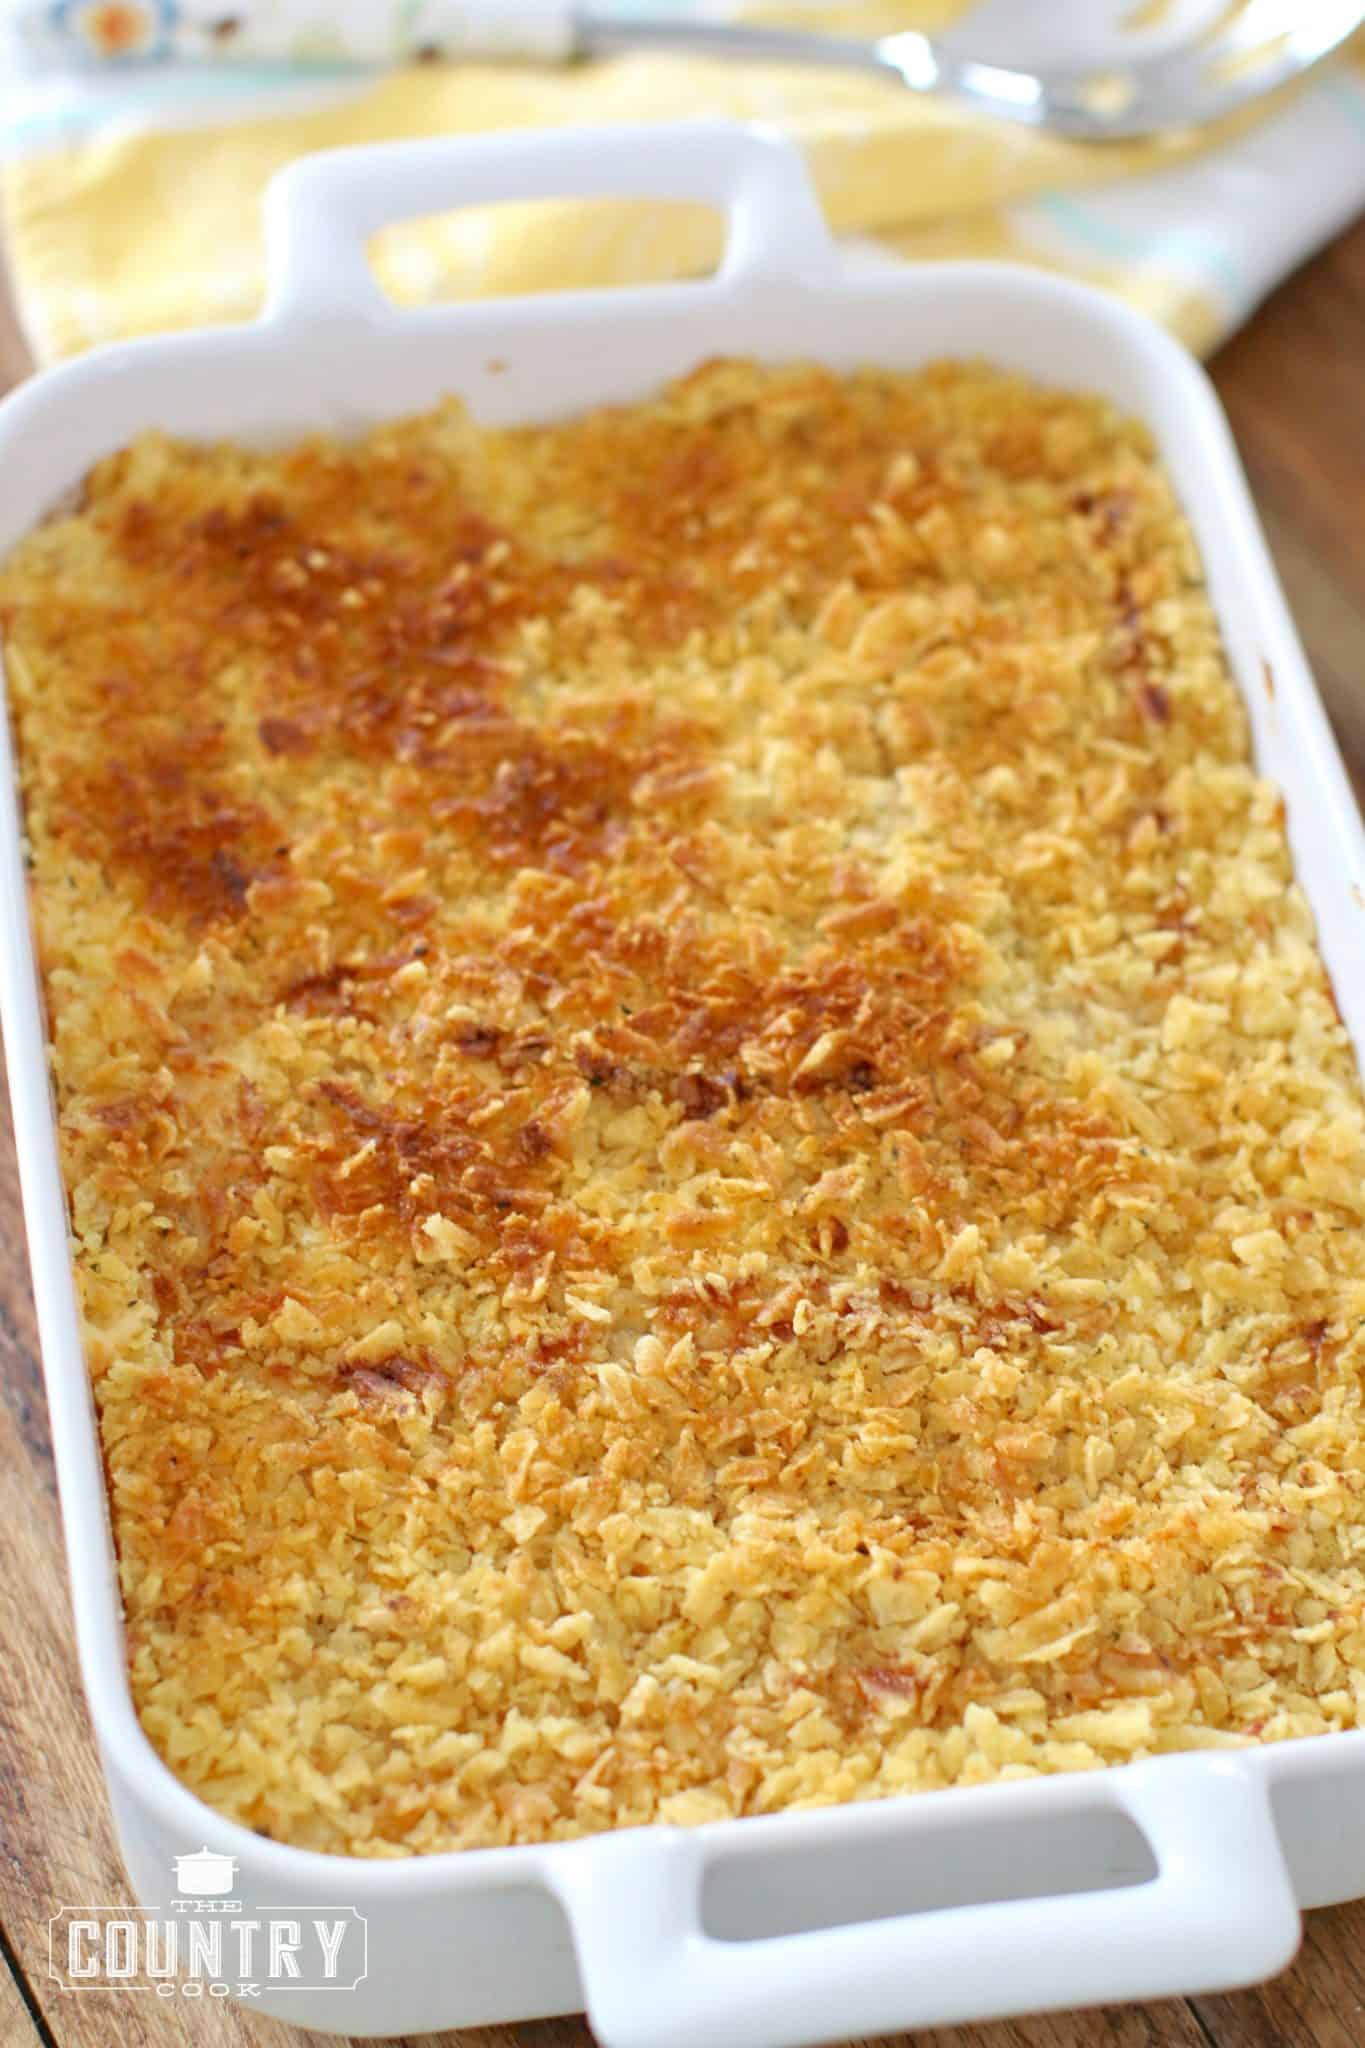 Funeral Potatoes, finished, shown in a white casserole dish, crushed potato chips shown browned.